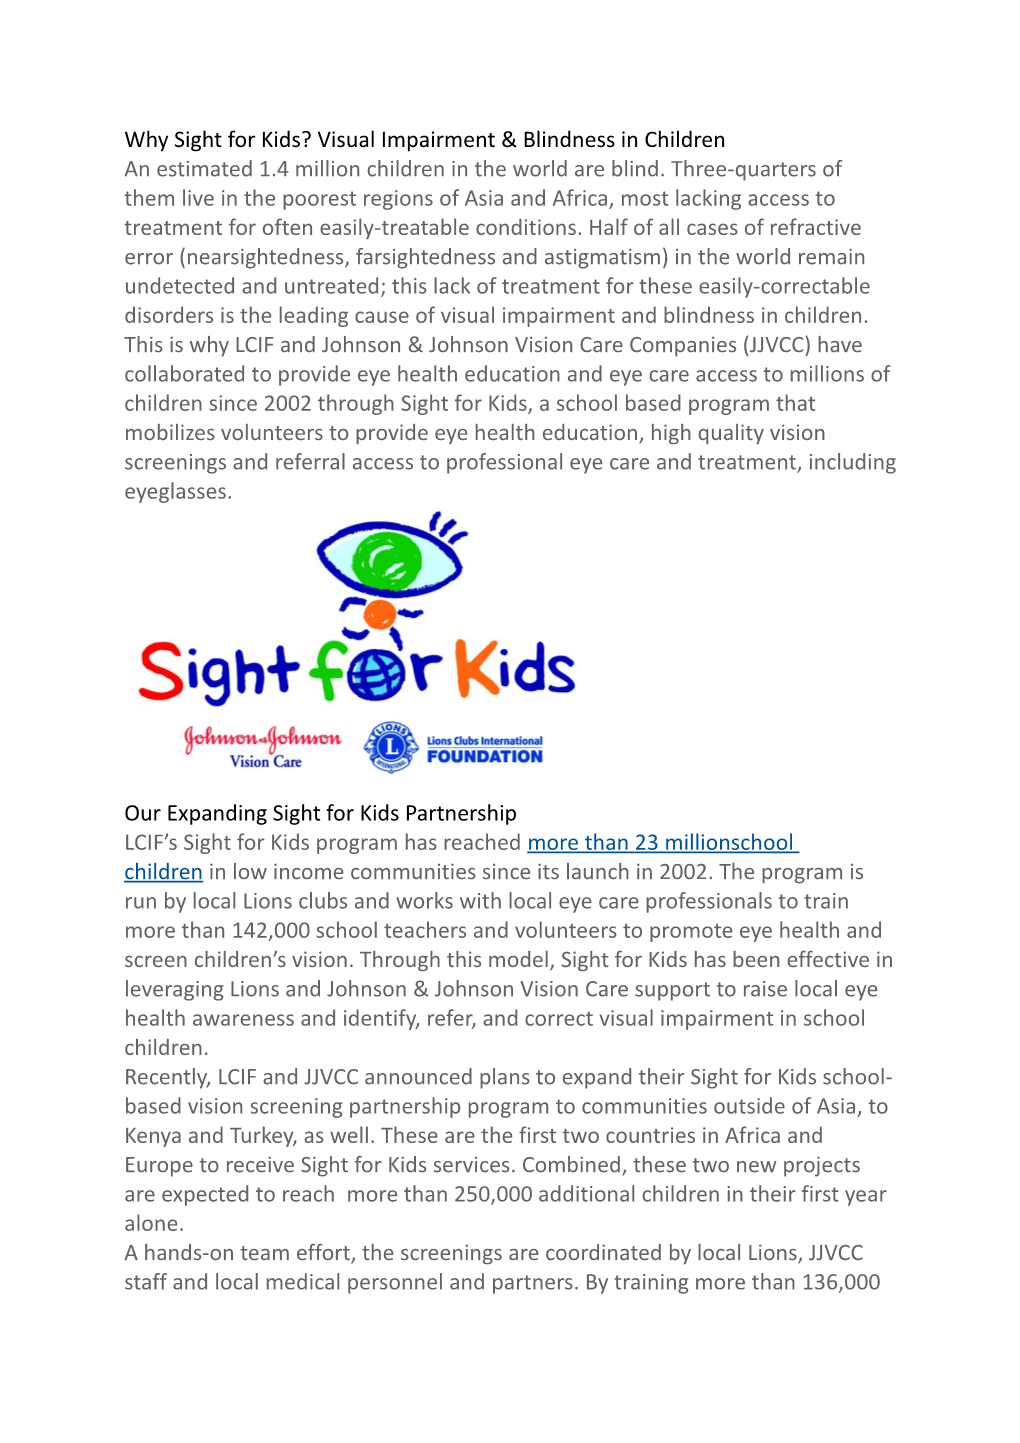 Why Sight for Kids? Visual Impairment & Blindness in Children